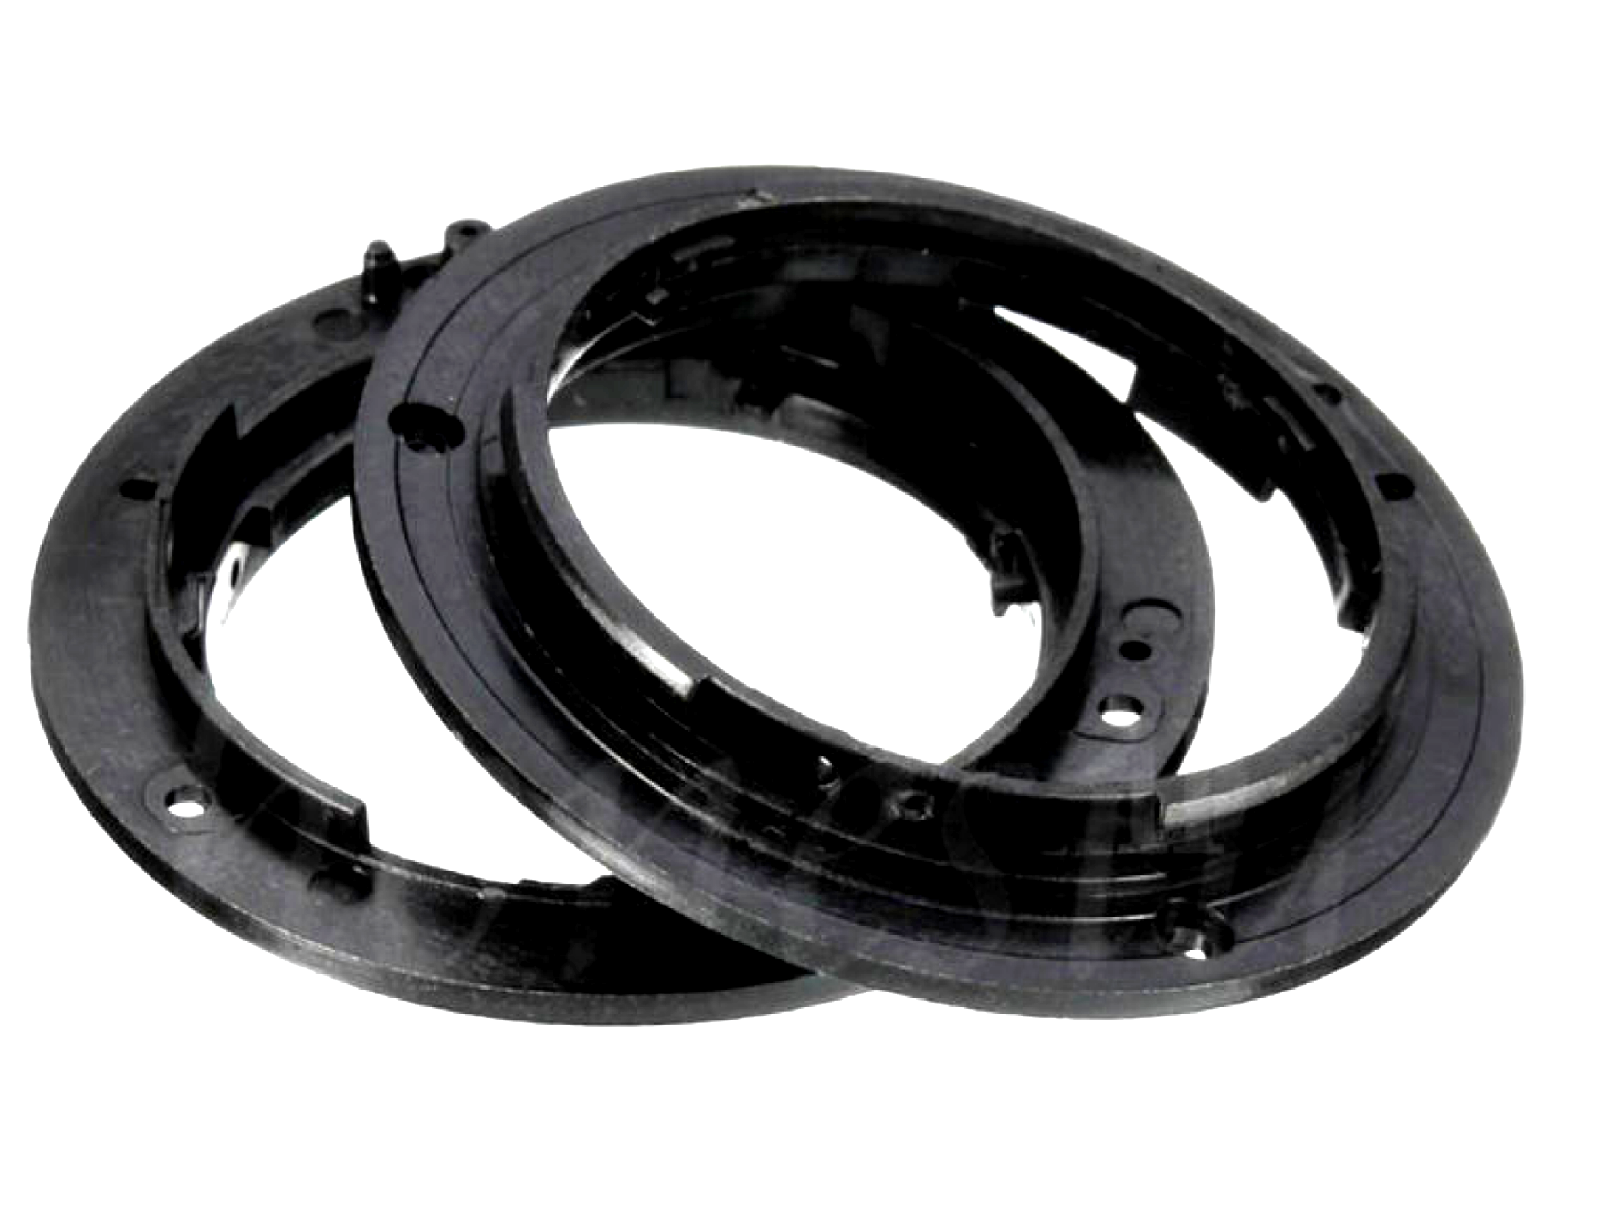 2x Replacement Rear Bayonet Mount Ring For Nikon 18-55mm 18-105mm 55-200mm Lens Unbranded/Generic Does not apply